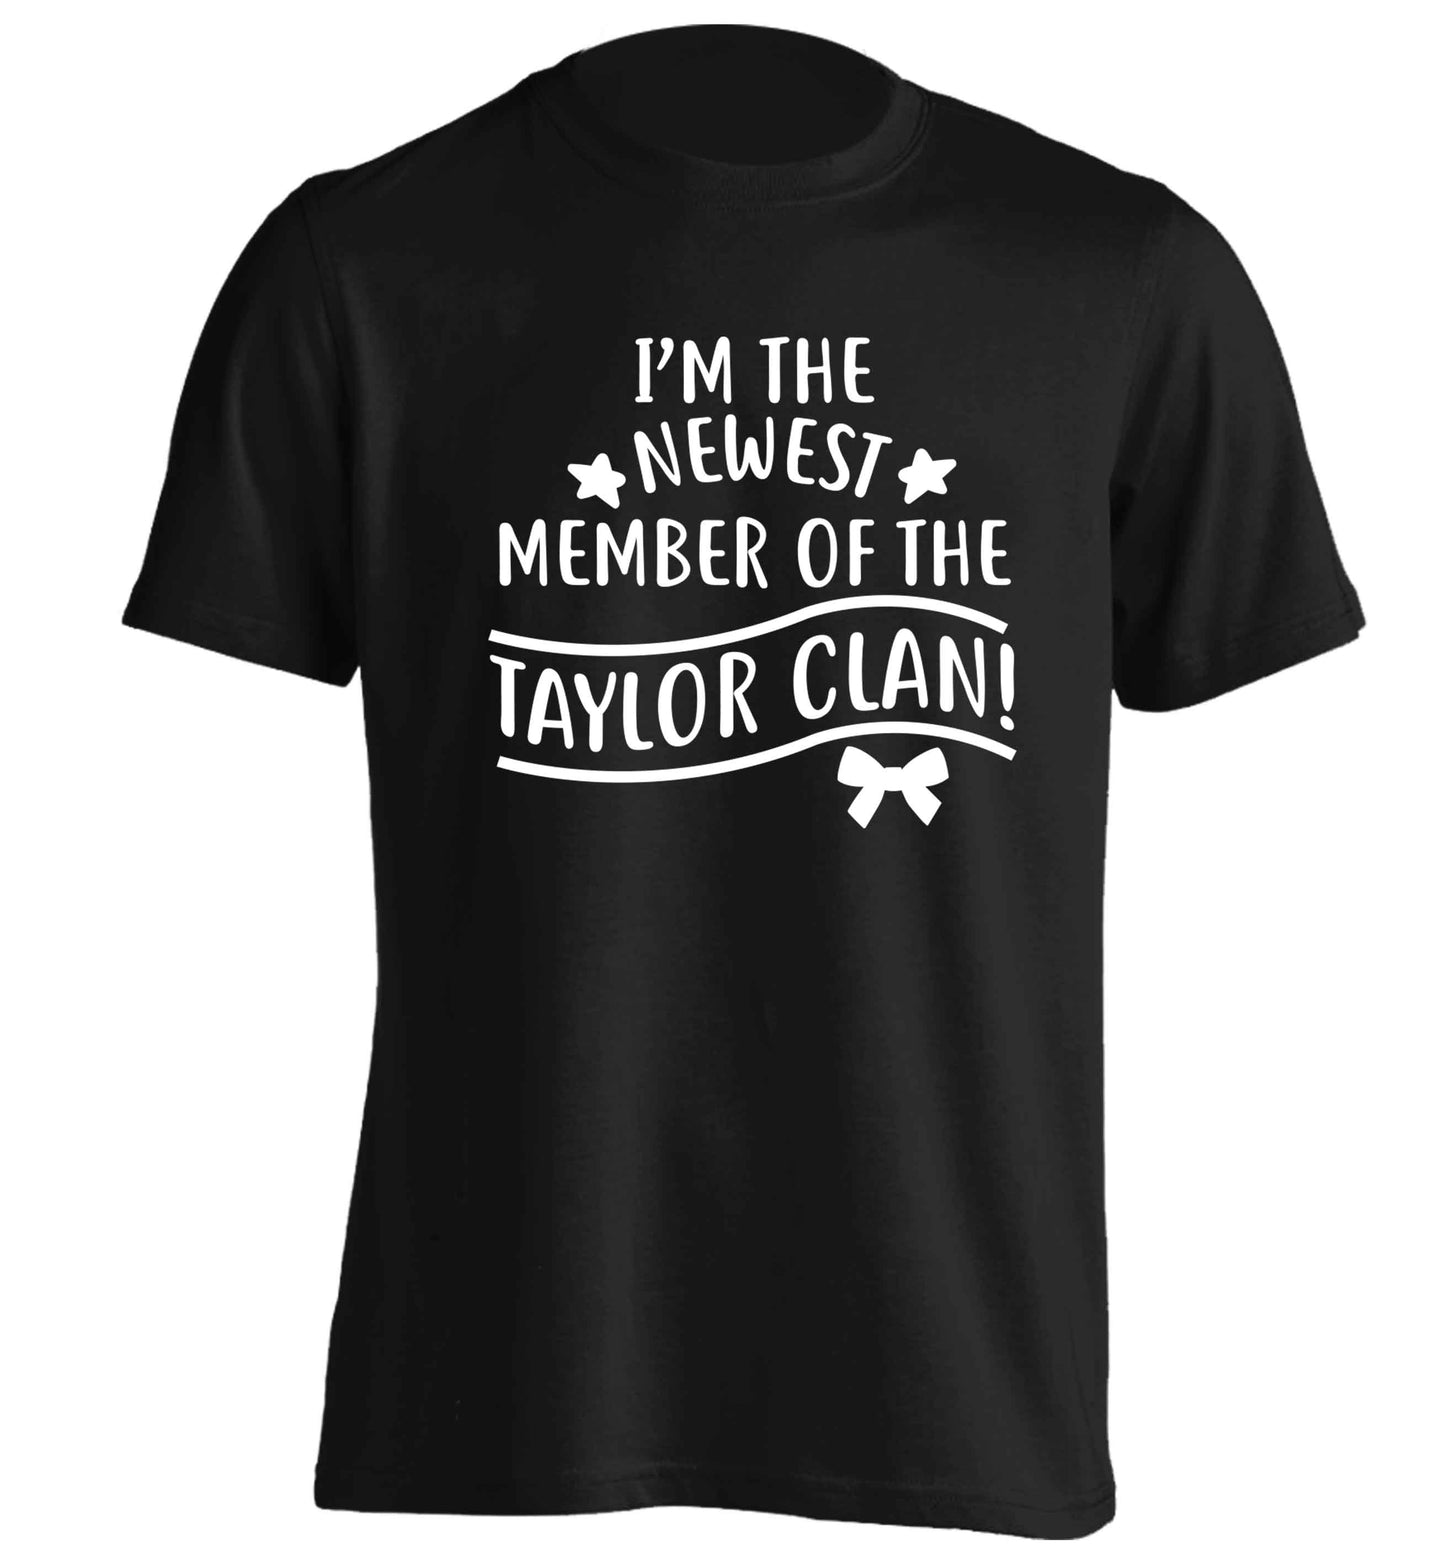 Personalised, newest member of the Taylor clan adults unisex black Tshirt 2XL